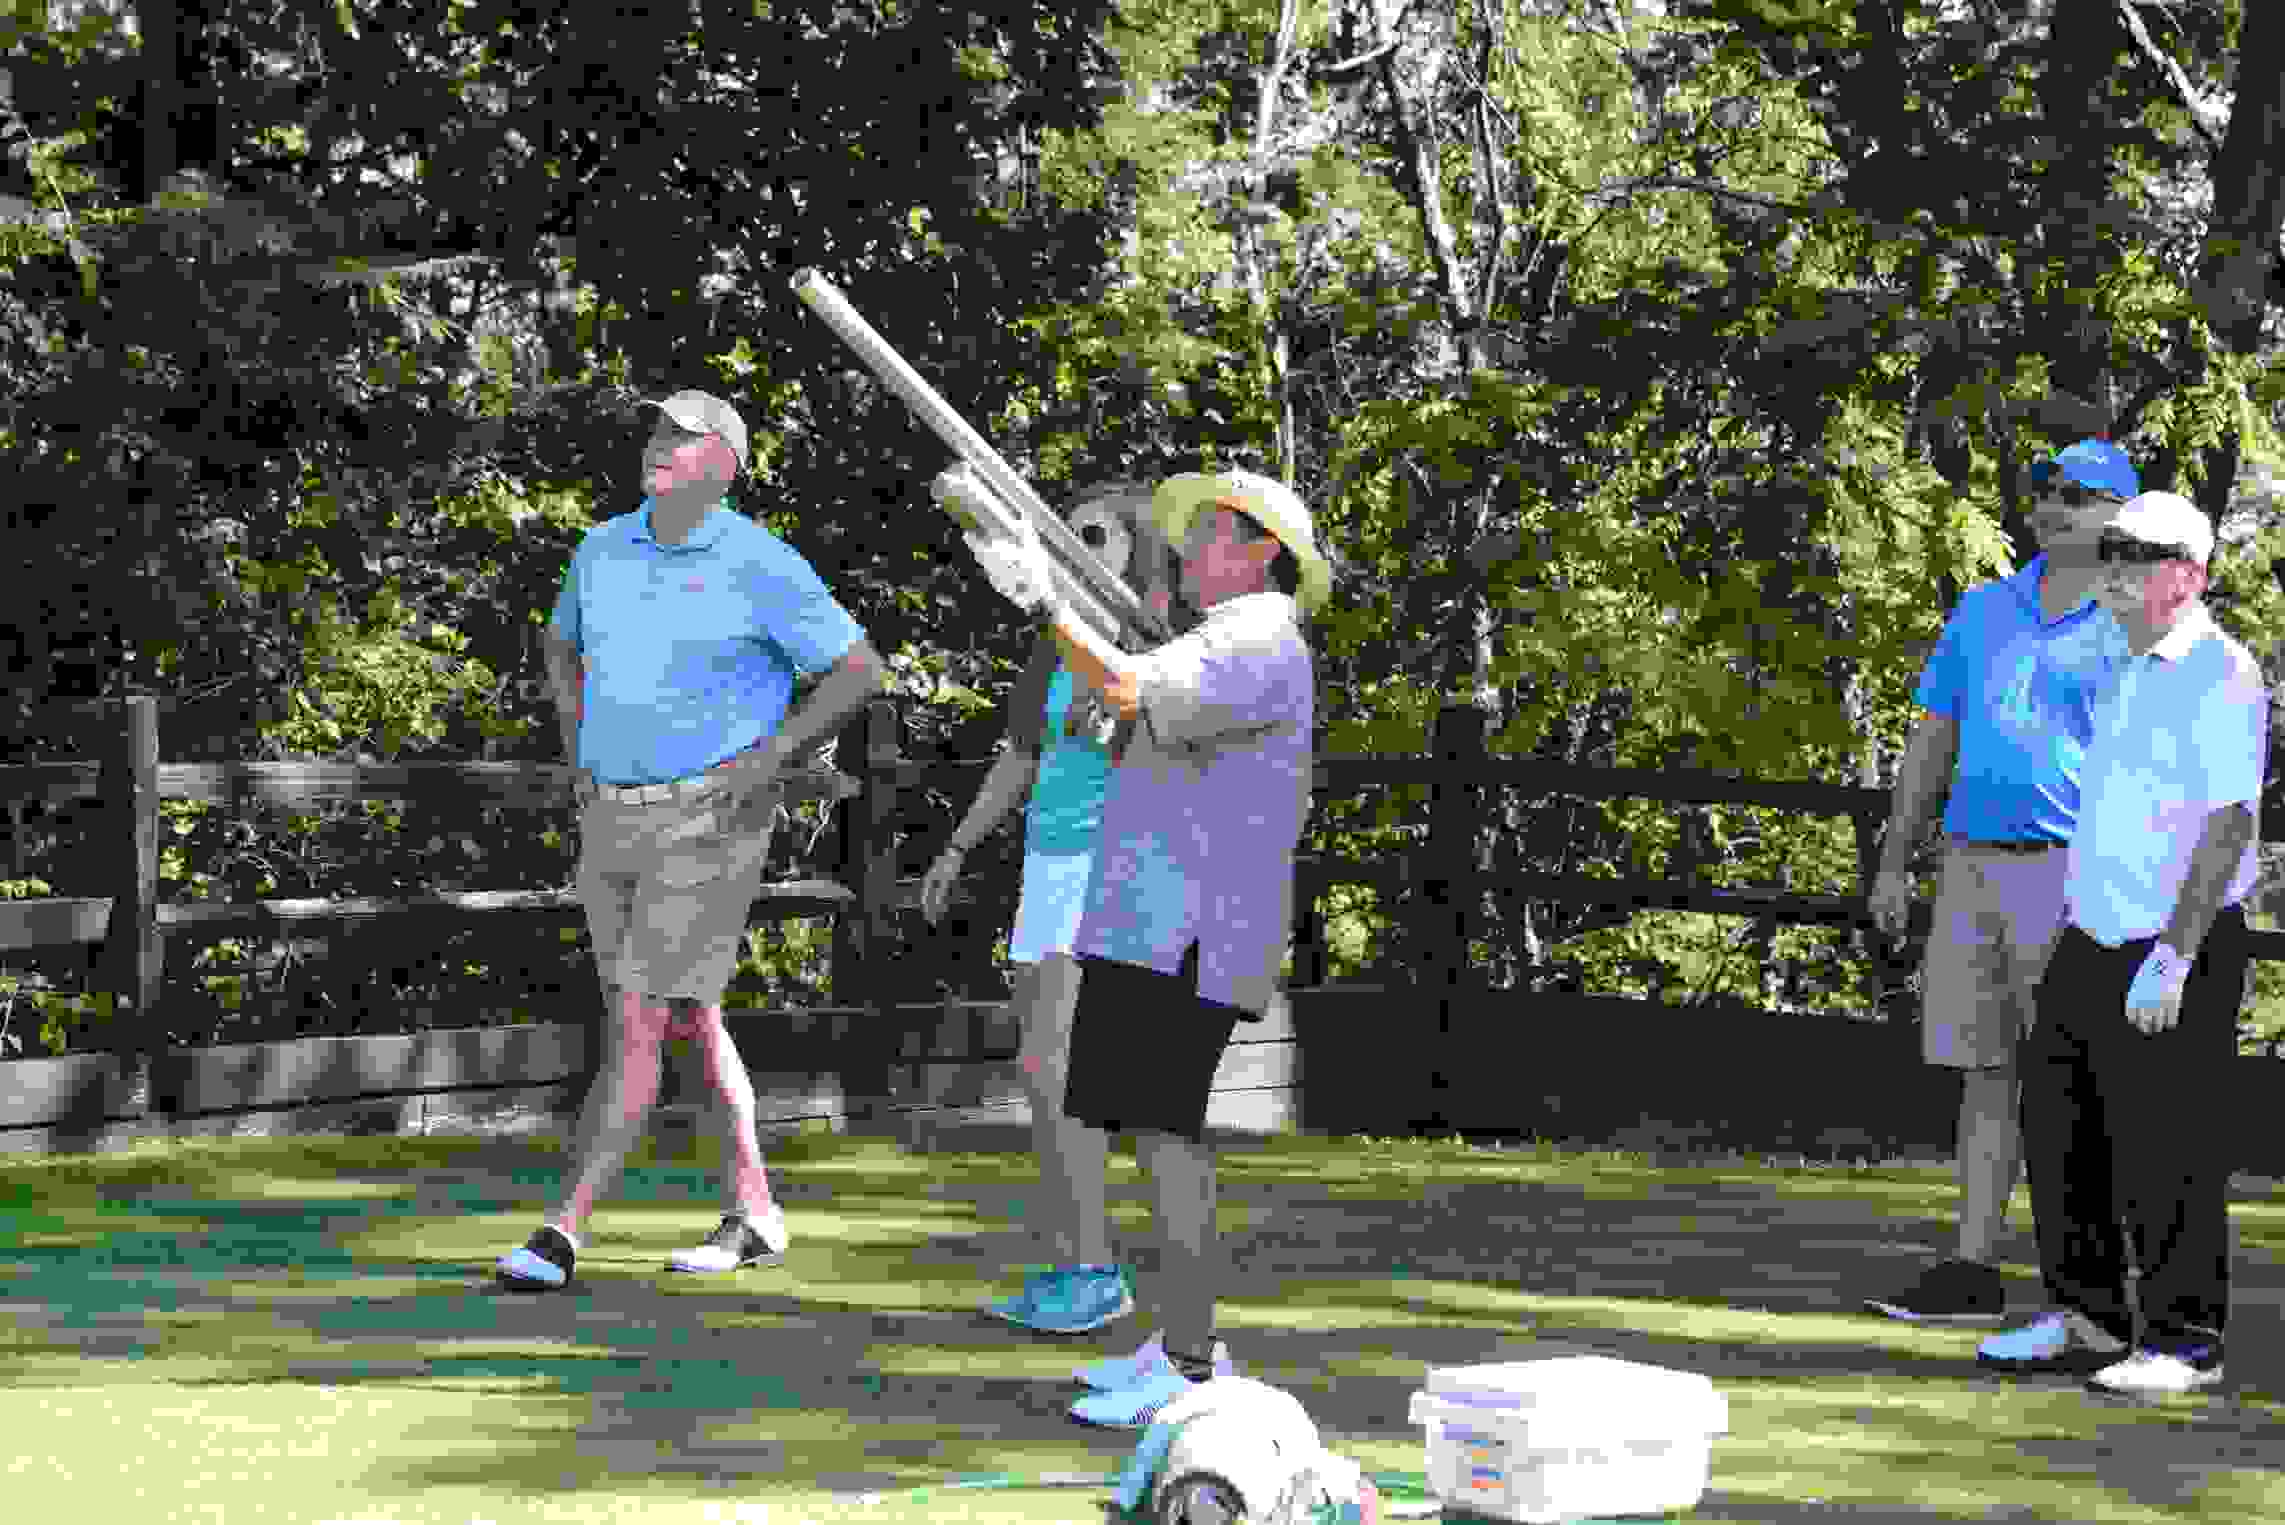 Golf Ball Launcher in action